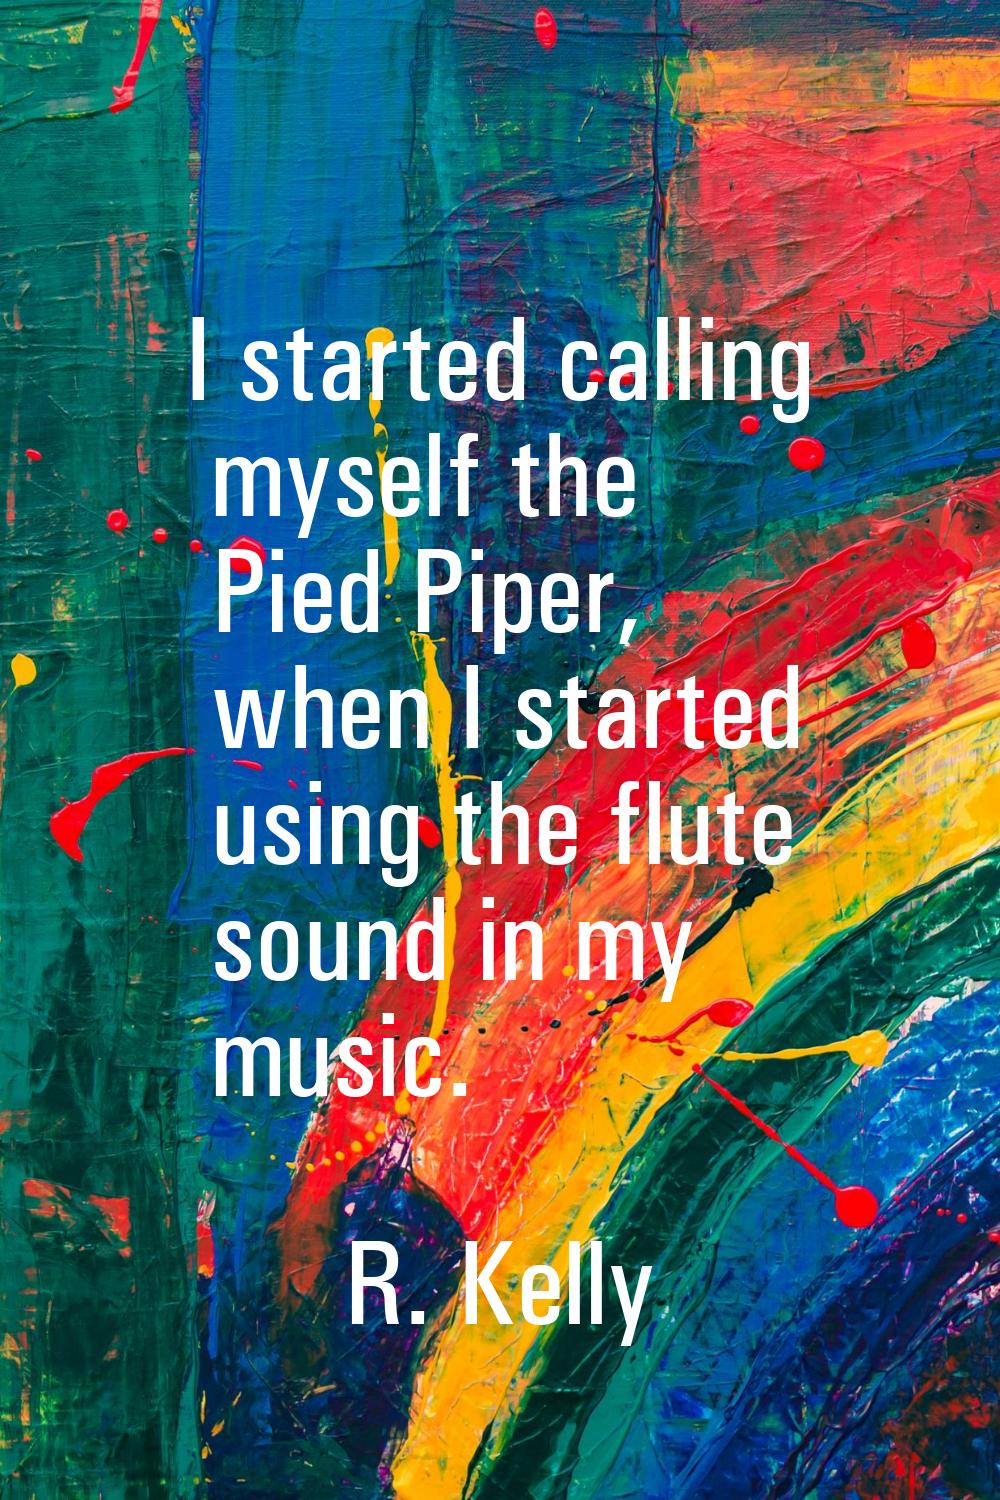 I started calling myself the Pied Piper, when I started using the flute sound in my music.